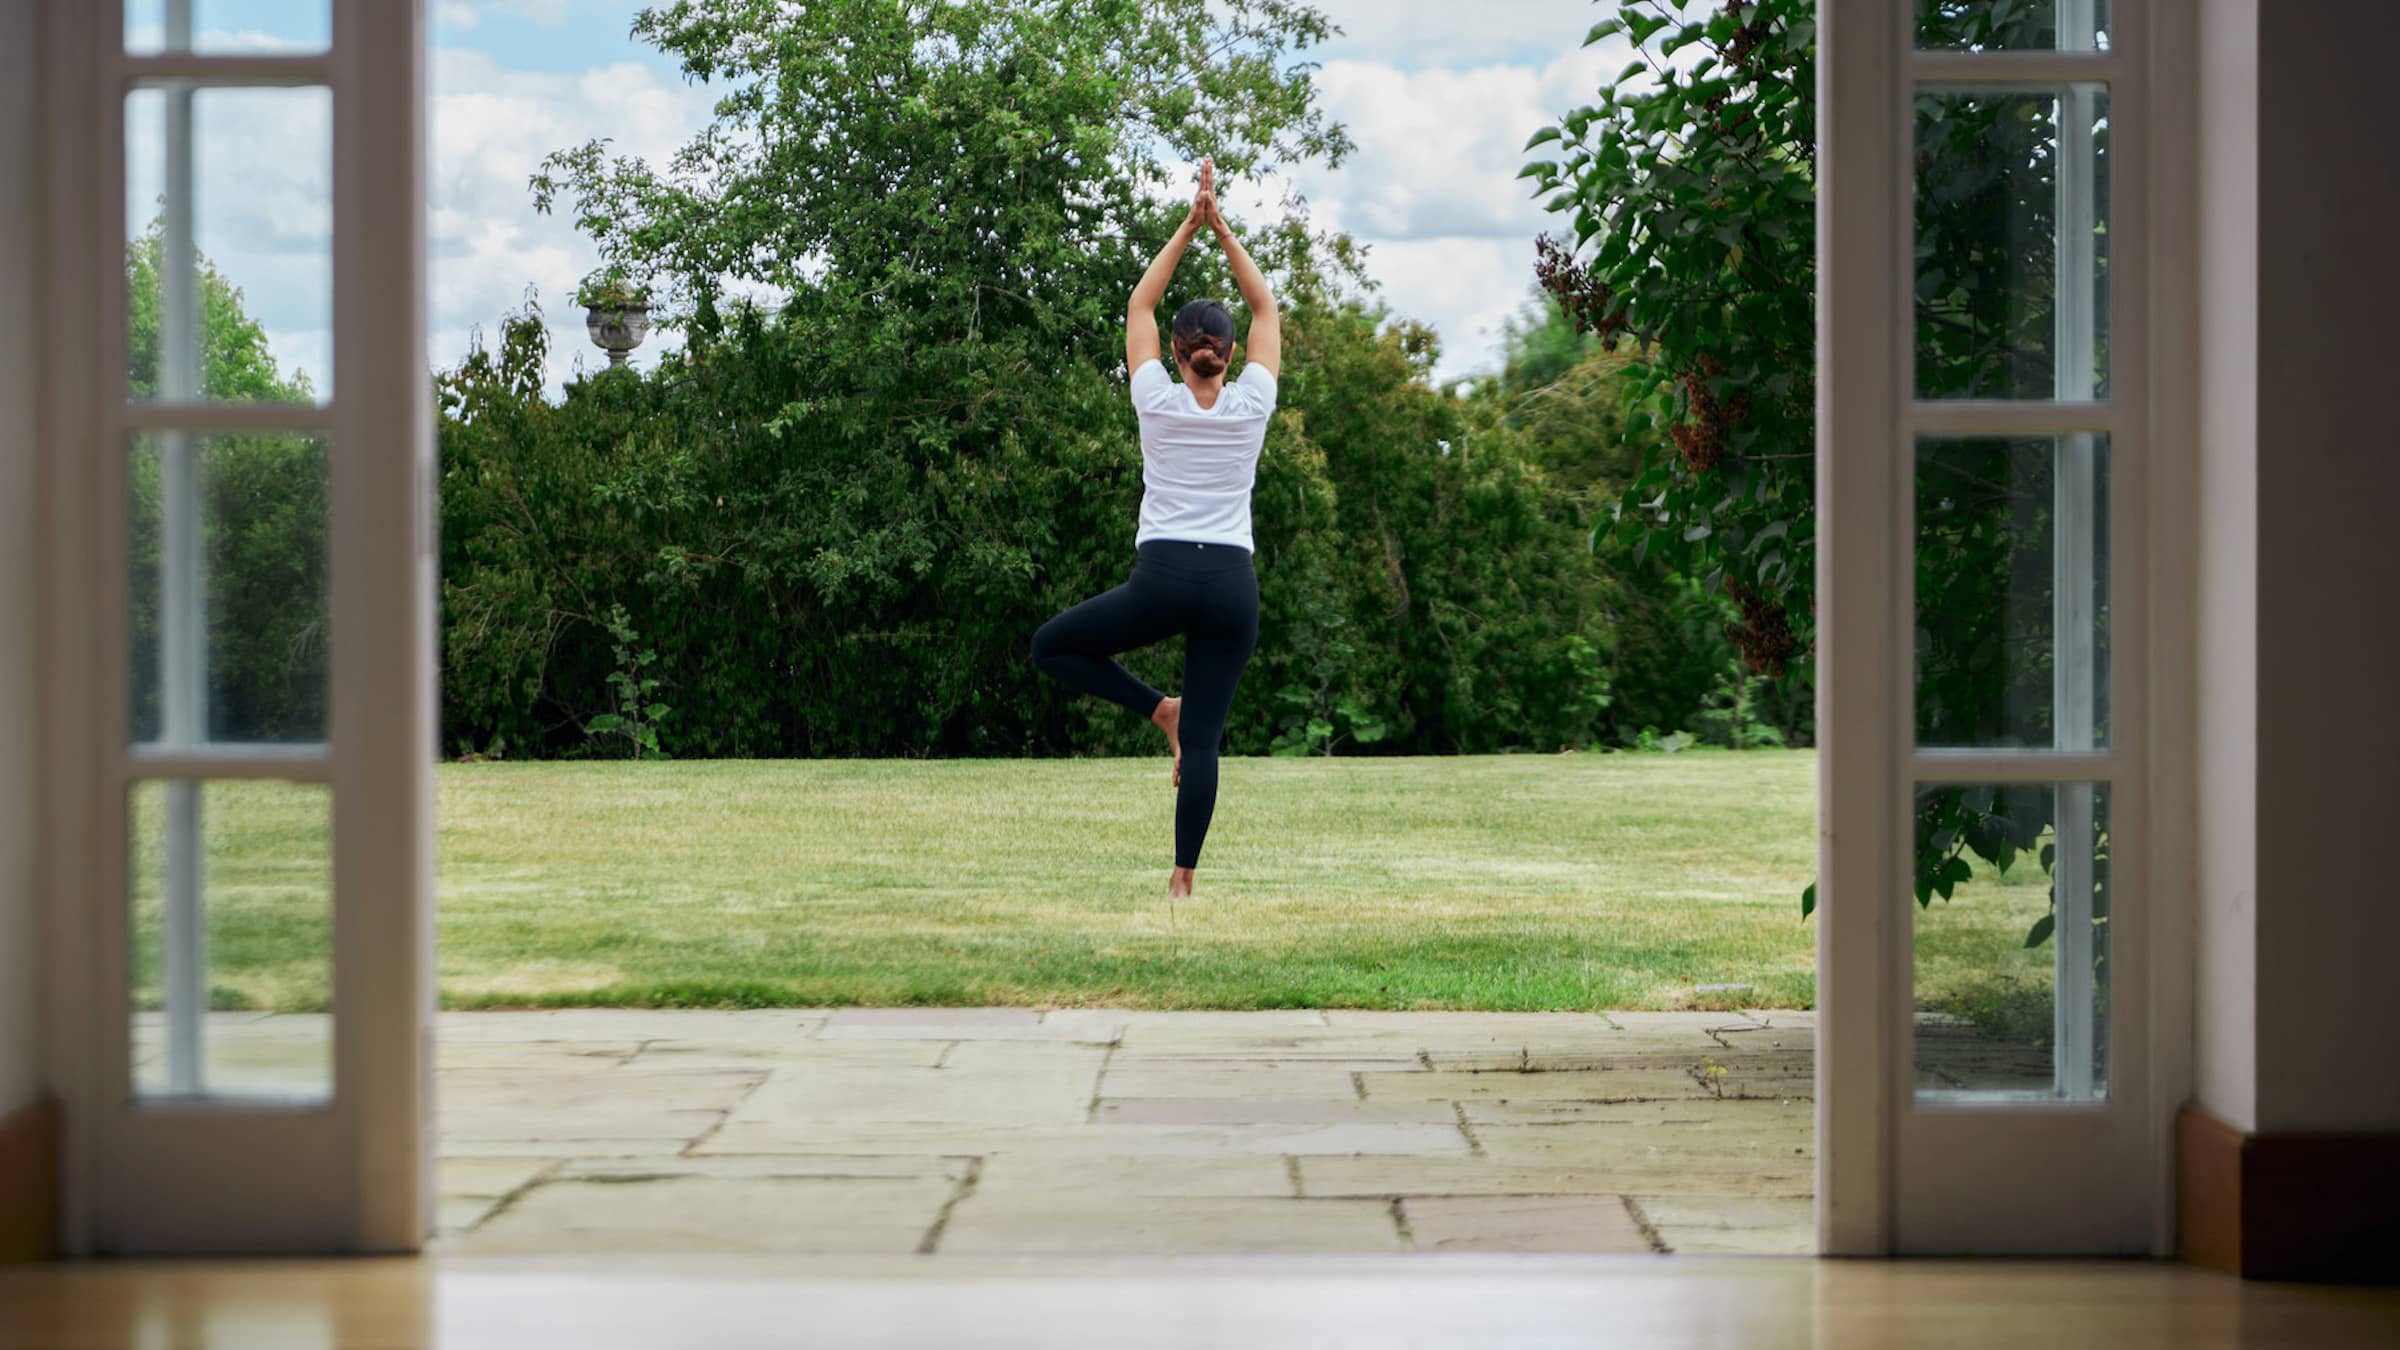 New wellness experiences launched for four seasons hampshire & london guests to reset and refocus their mind and body in 2023